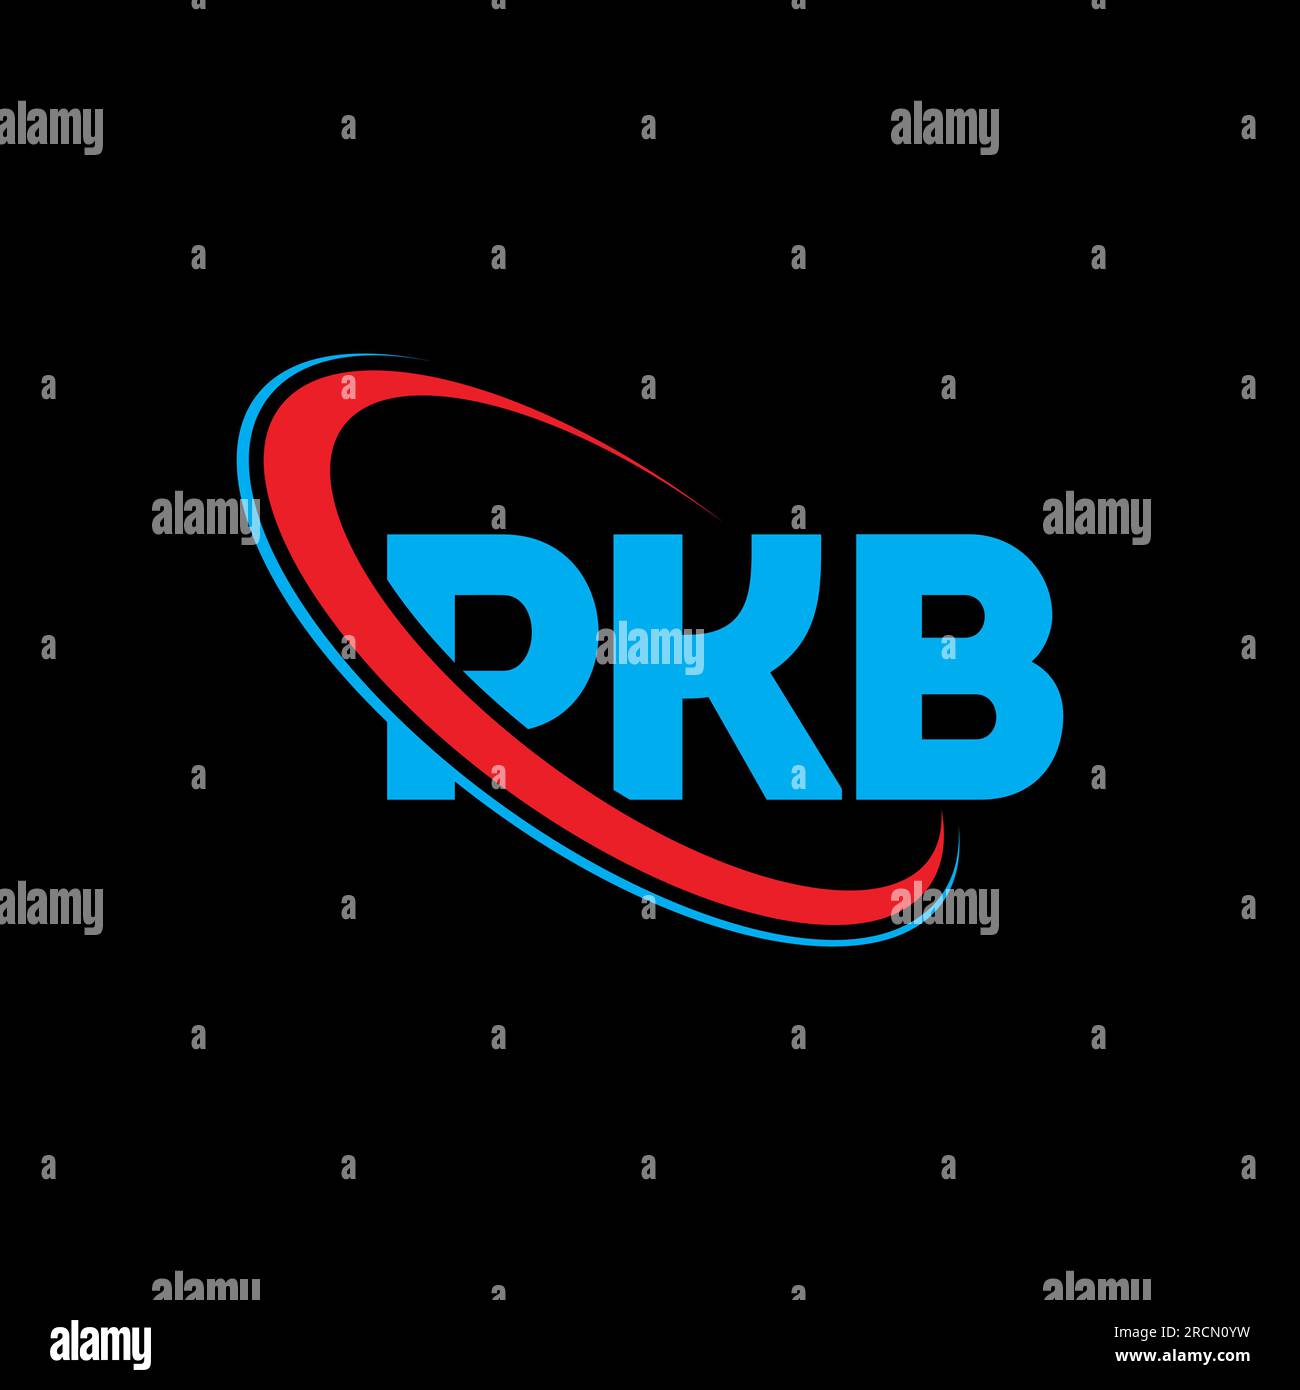 PKB logo. PKB letter. PKB letter logo design. Initials PKB logo linked with circle and uppercase monogram logo. PKB typography for technology, busines Stock Vector